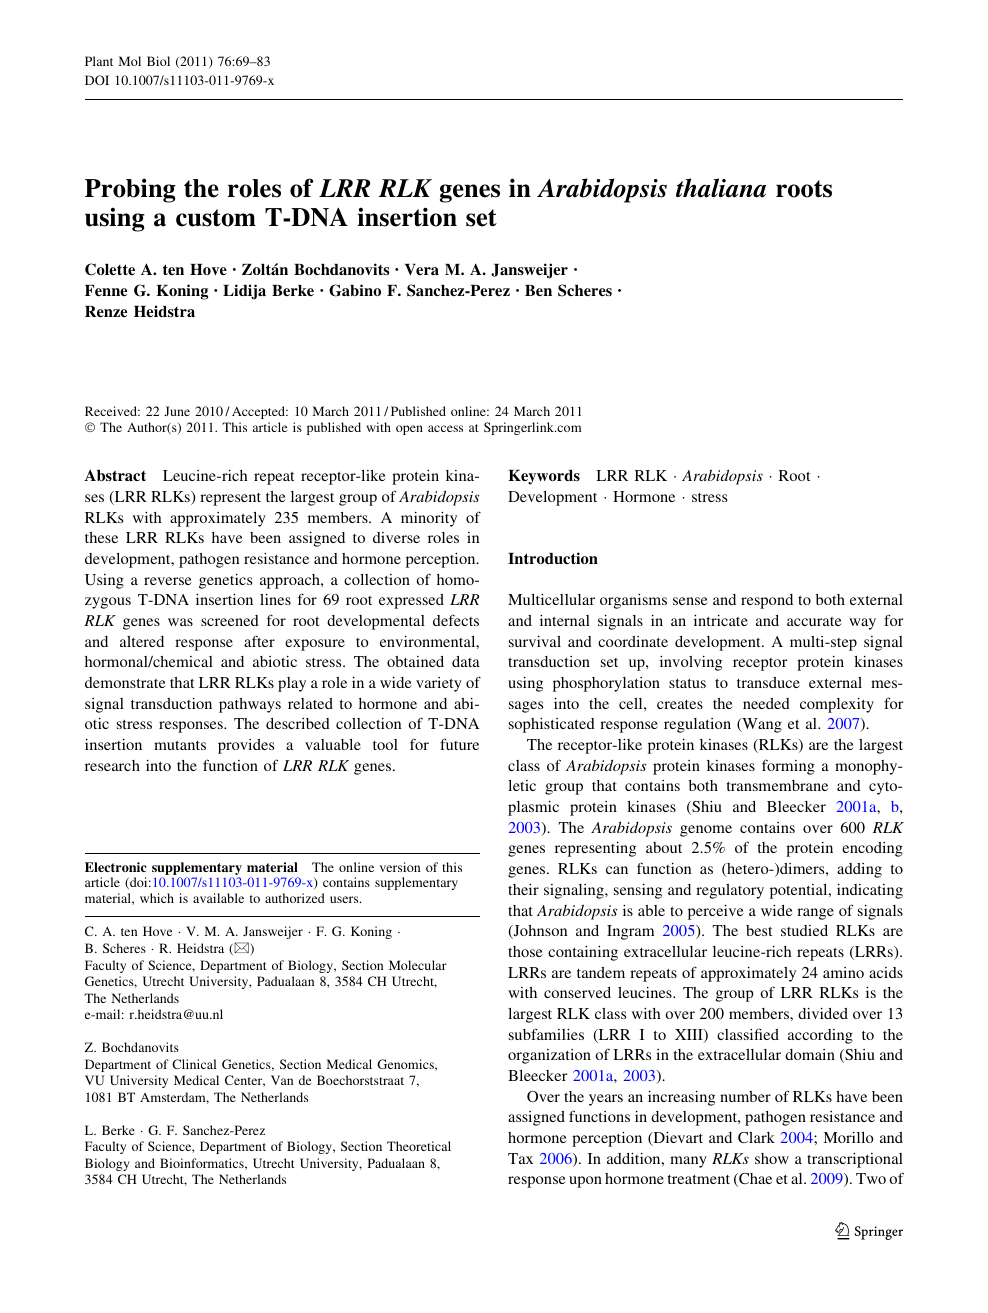 Probing The Roles Of Lrr Rlk Genes In Arabidopsis Thaliana Roots Using A Custom T Dna Insertion Set Topic Of Research Paper In Biological Sciences Download Scholarly Article Pdf And Read For